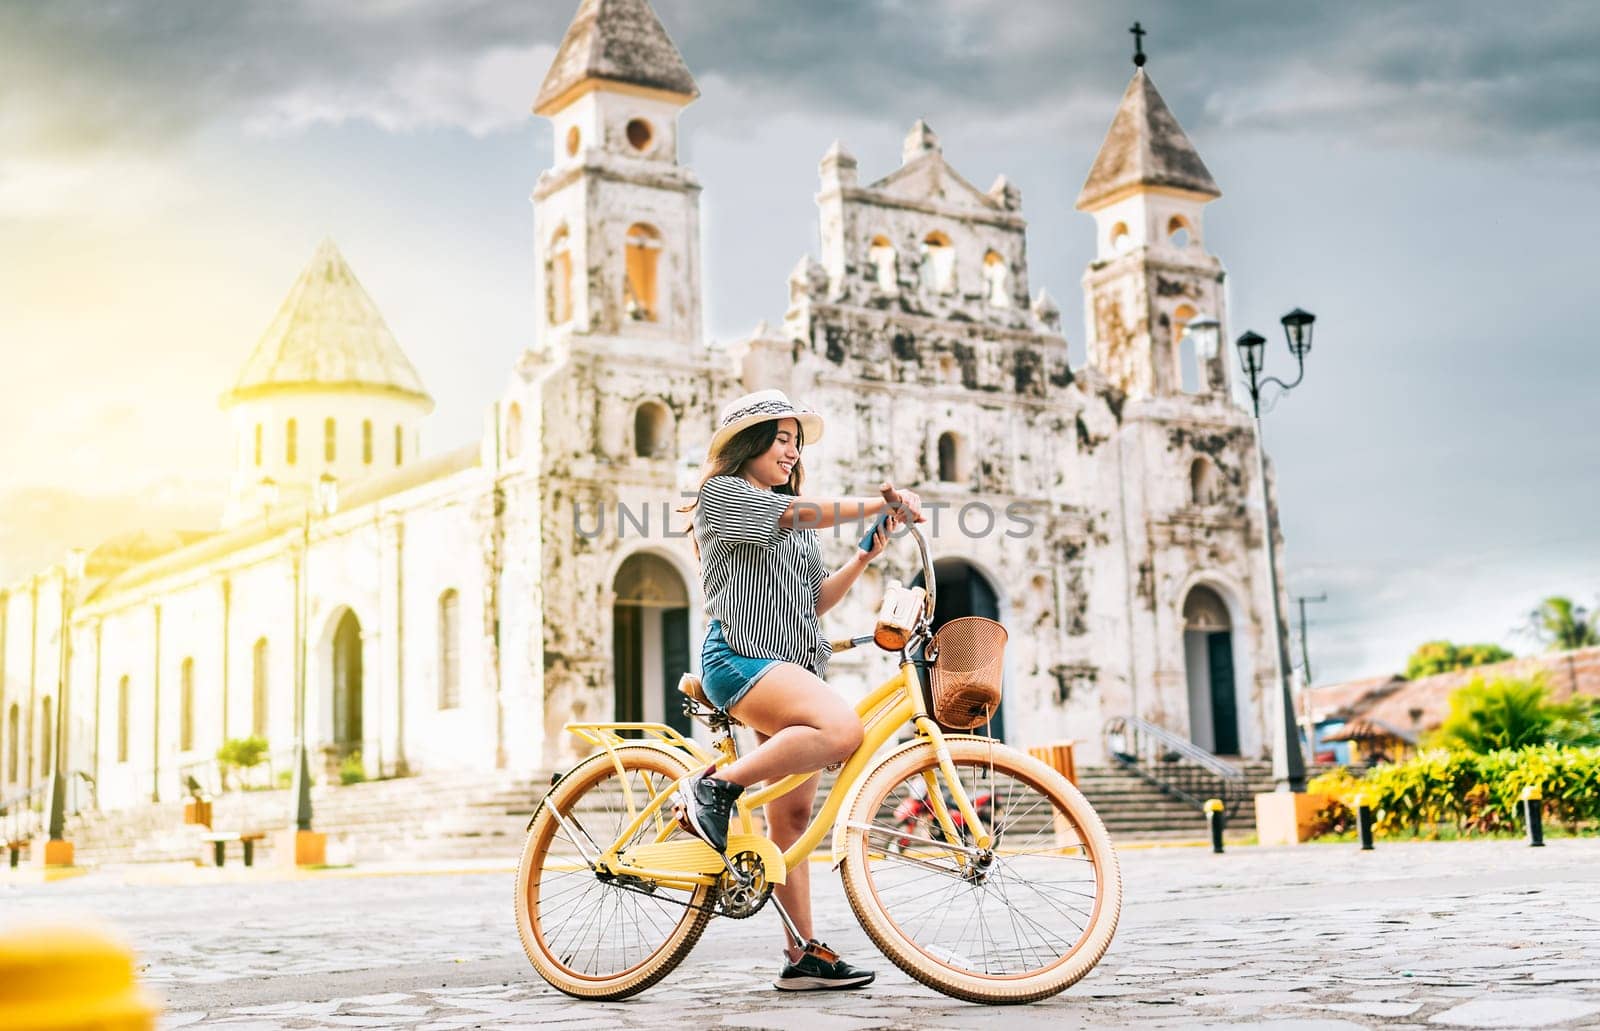 The girl is on the street smiling at the cell phone while she is on her bicycle, there is a church in the background on a beautiful day